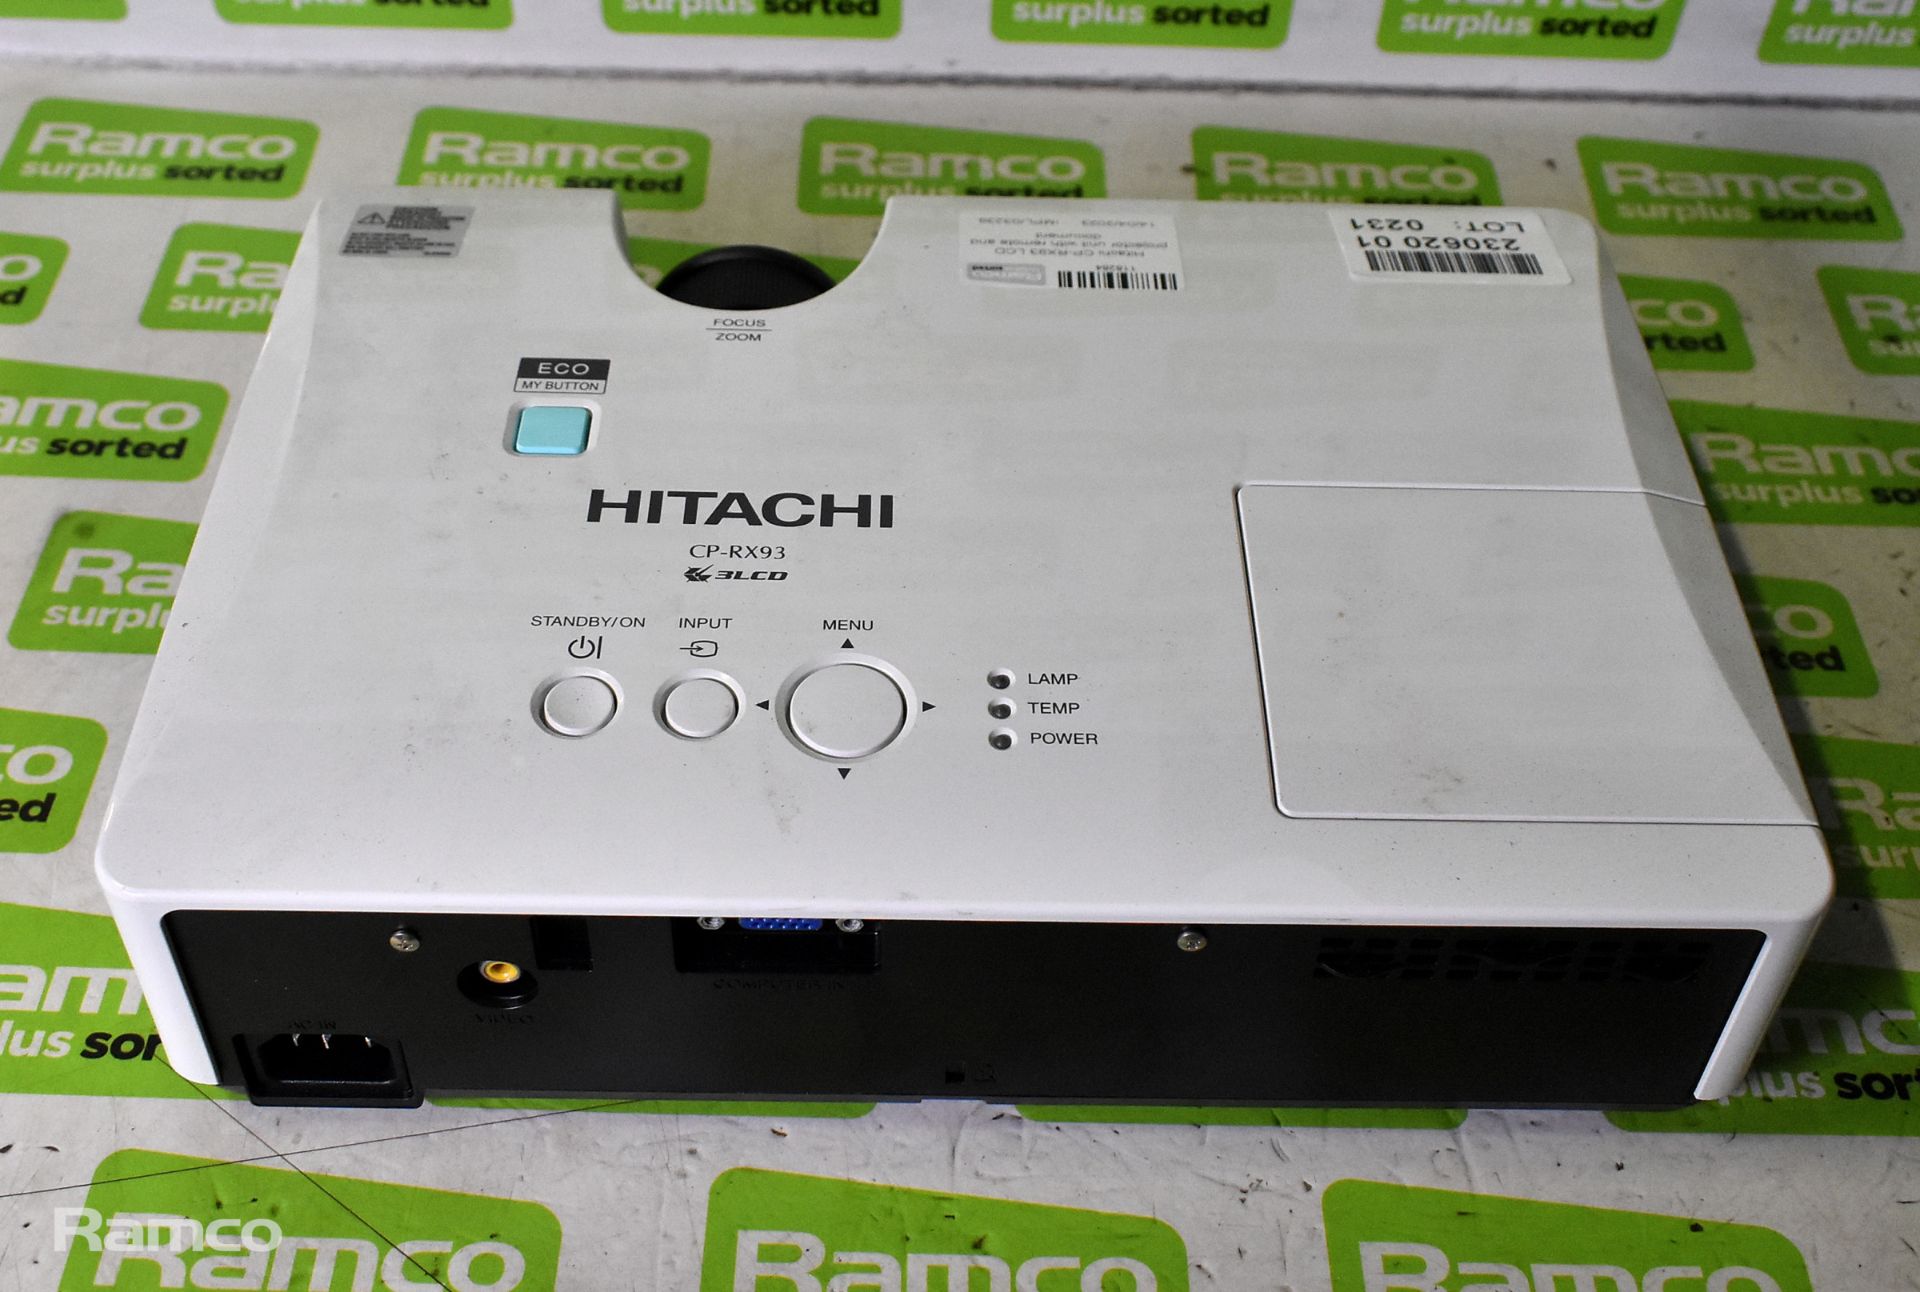 Hitachi CP-RX93 LCD projector unit with remote and document - Bild 2 aus 4